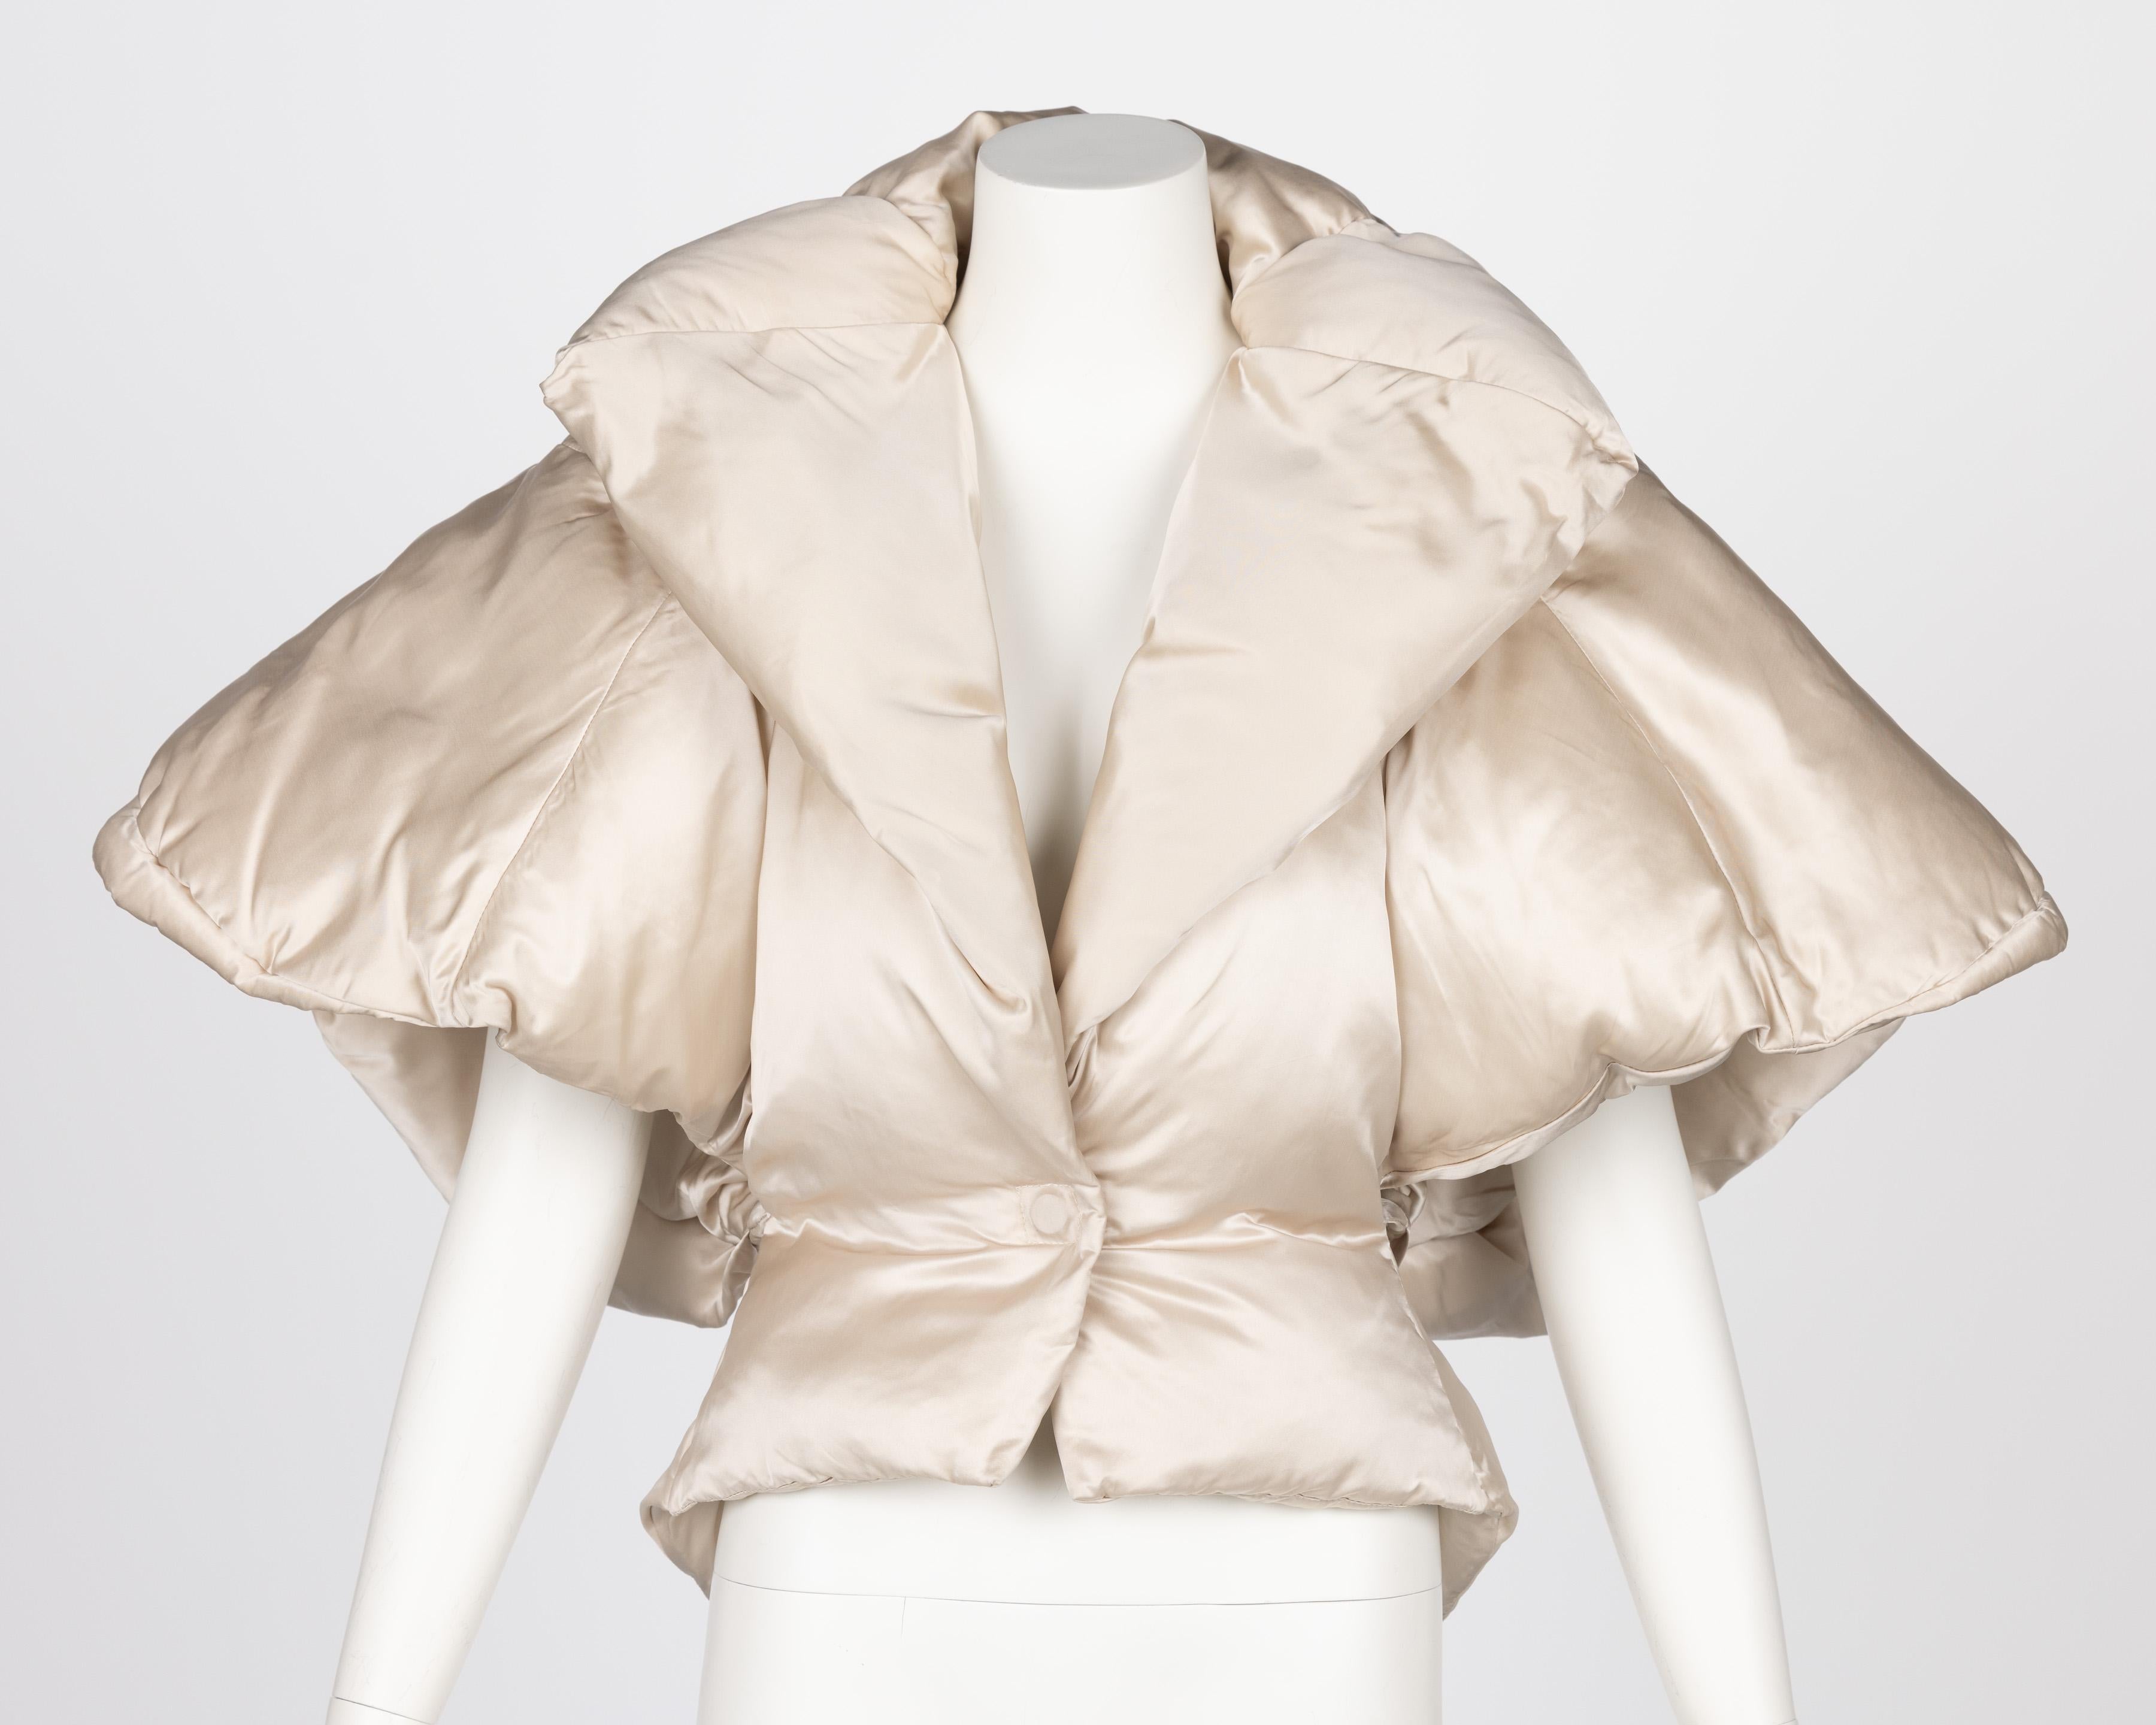 Stella McCartney F/W 2004 Champagne Sculptural Show Stopping Puffer Jacket In Excellent Condition For Sale In Boca Raton, FL